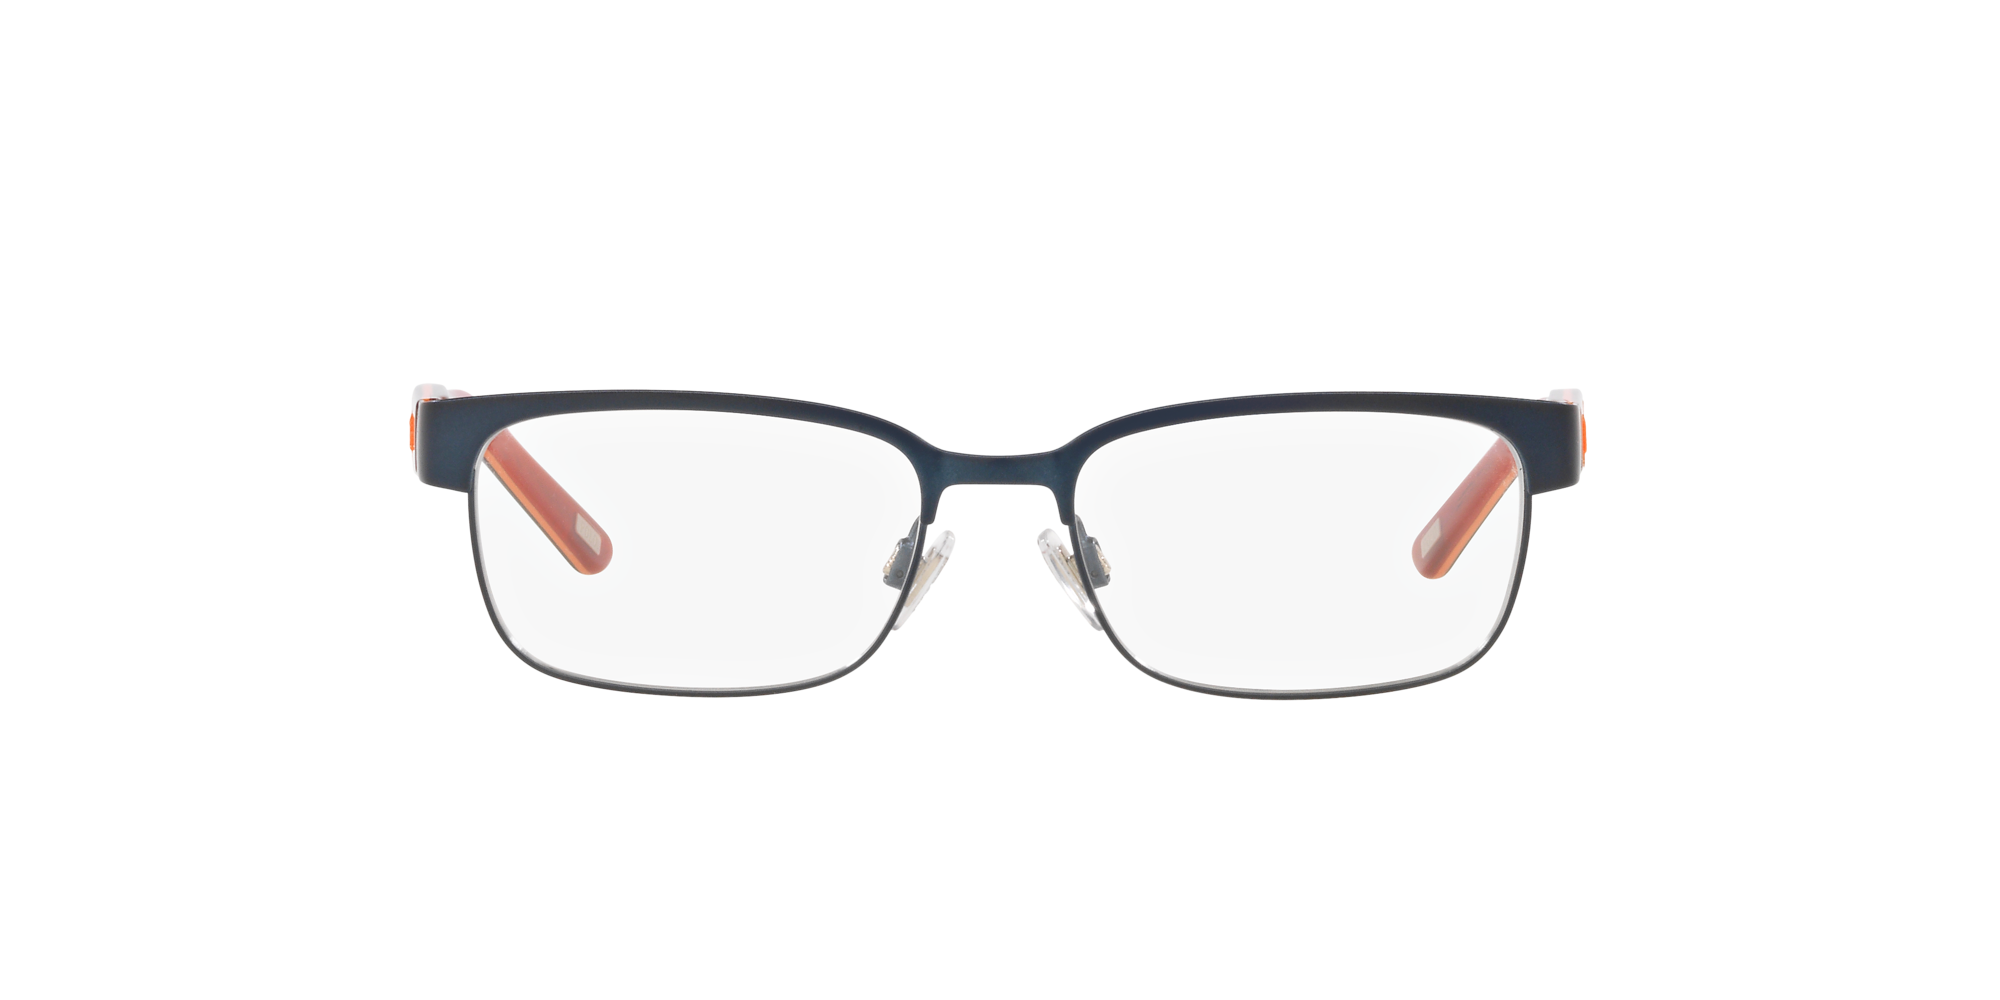 polo glasses lenscrafters